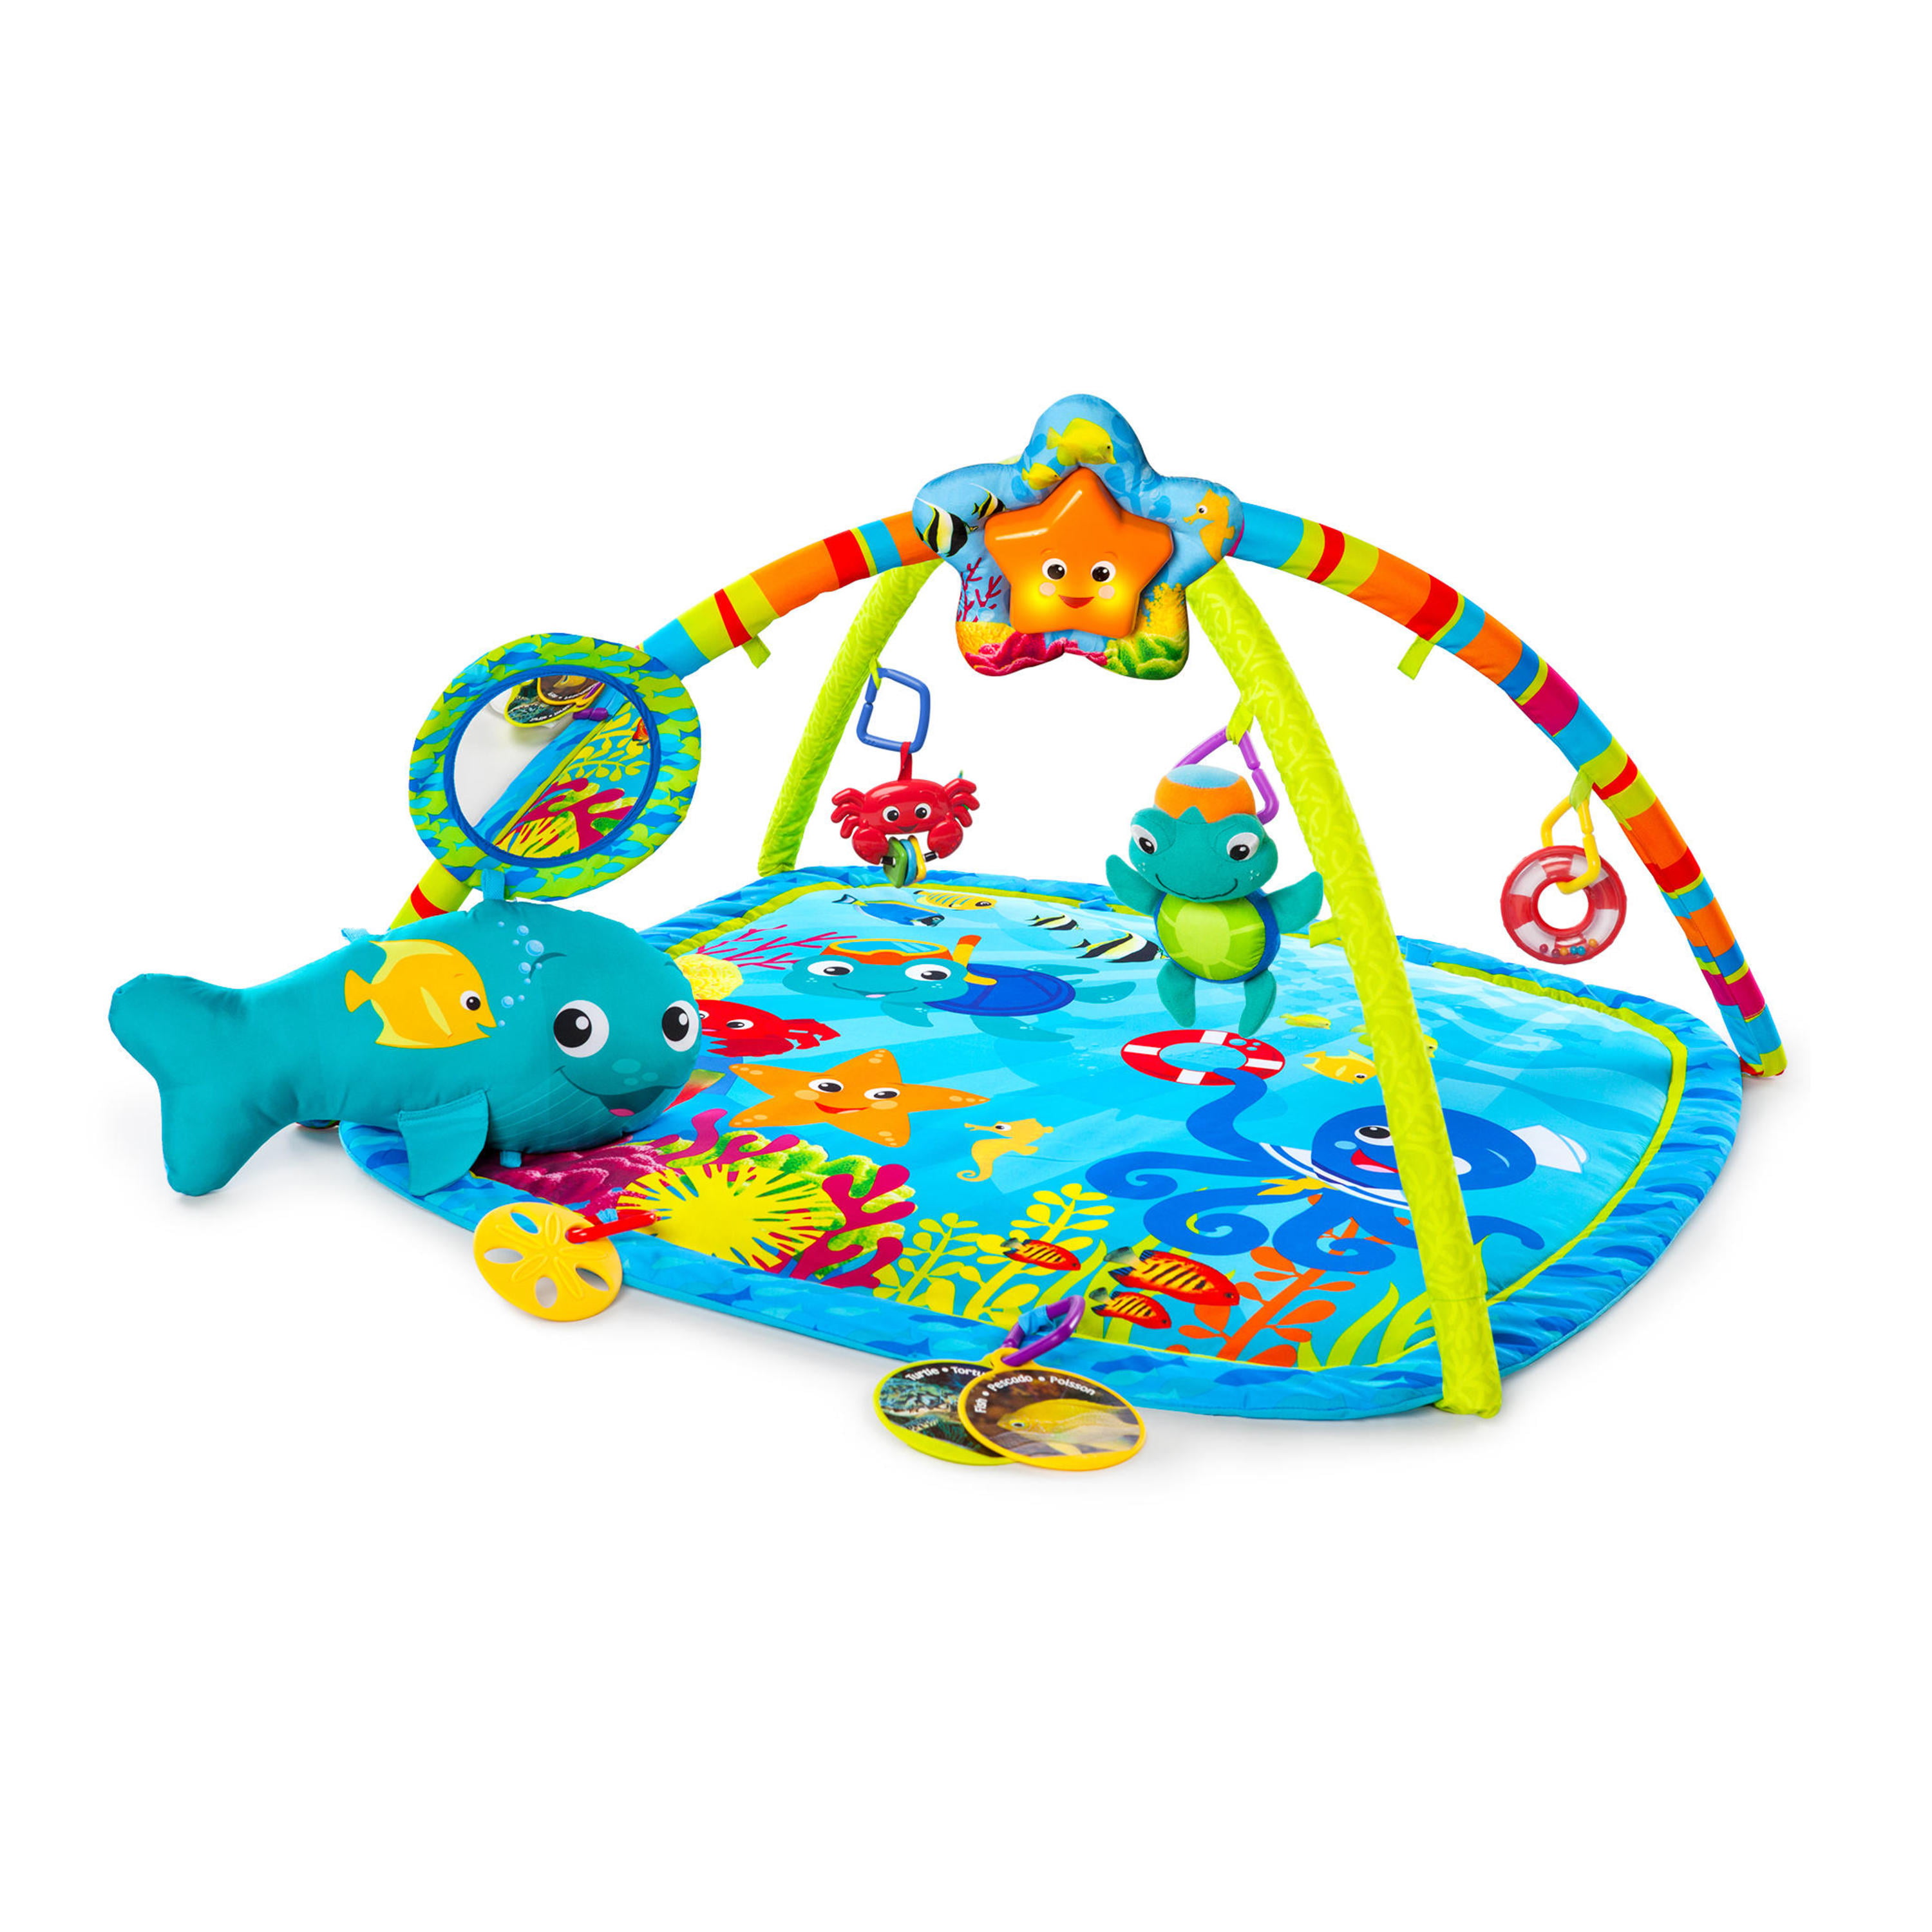 ocean baby shower gift Activity play gym toys set nautical animals